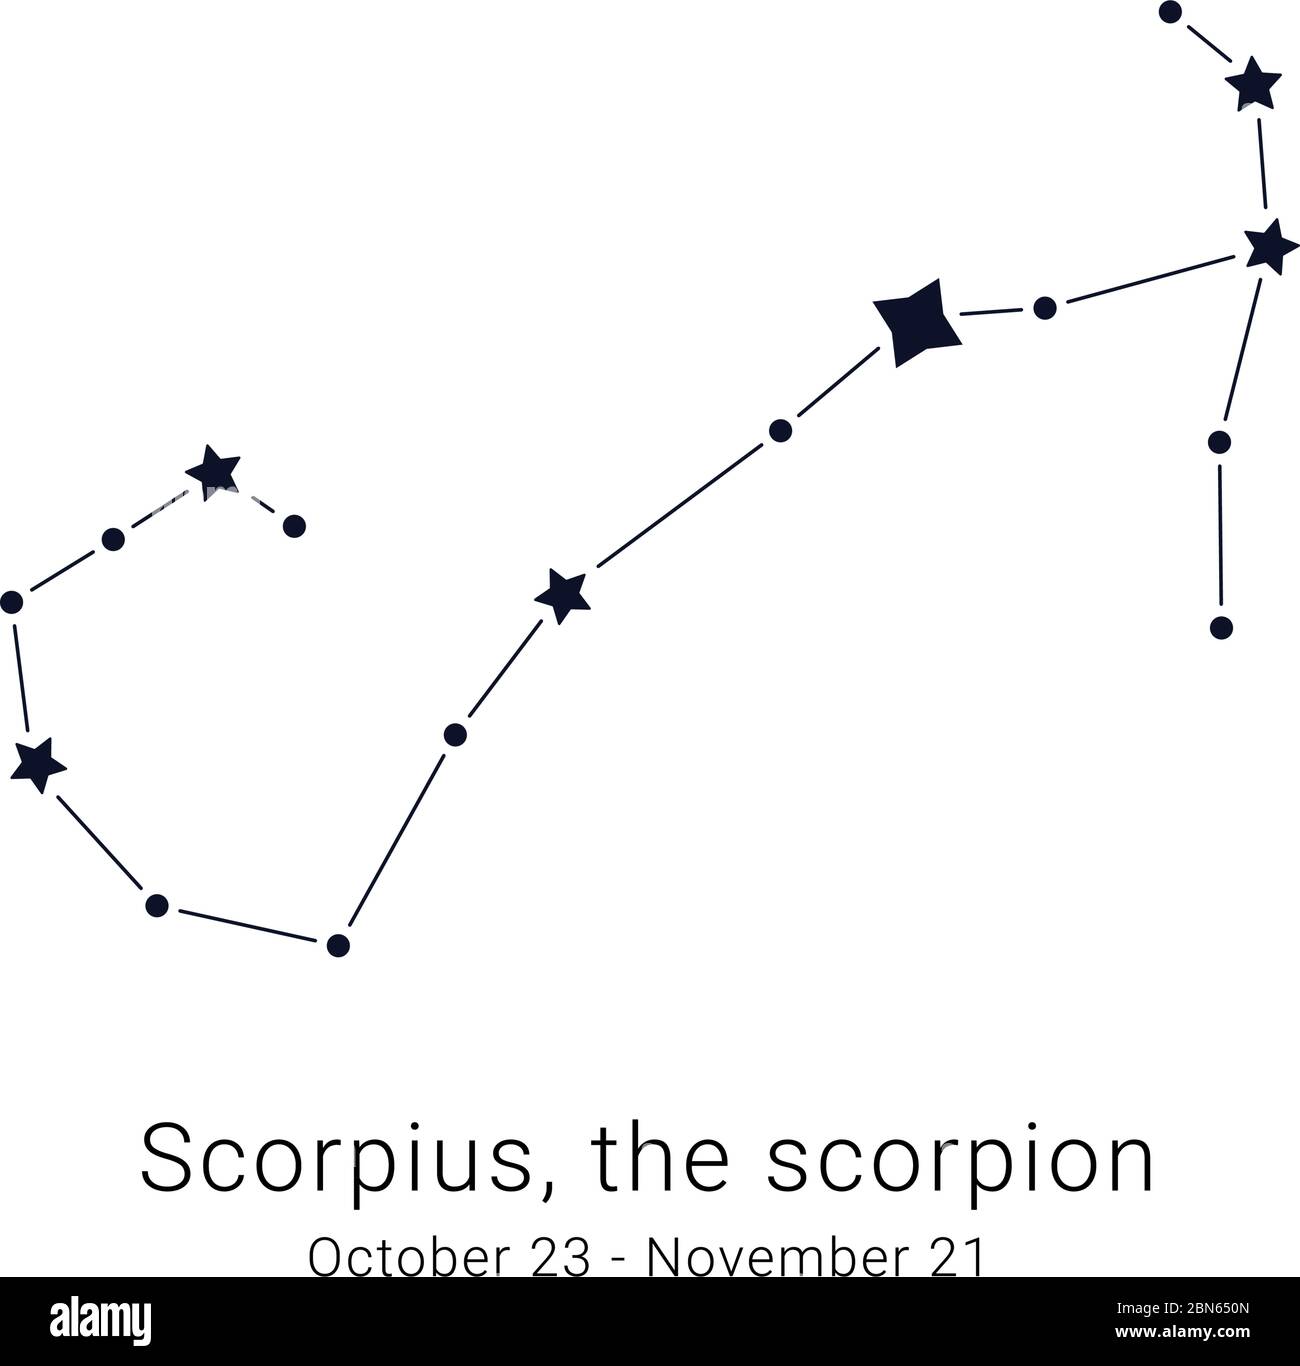 Scorpius, the scorpion. Constellation and the date of birth range. Stock Vector